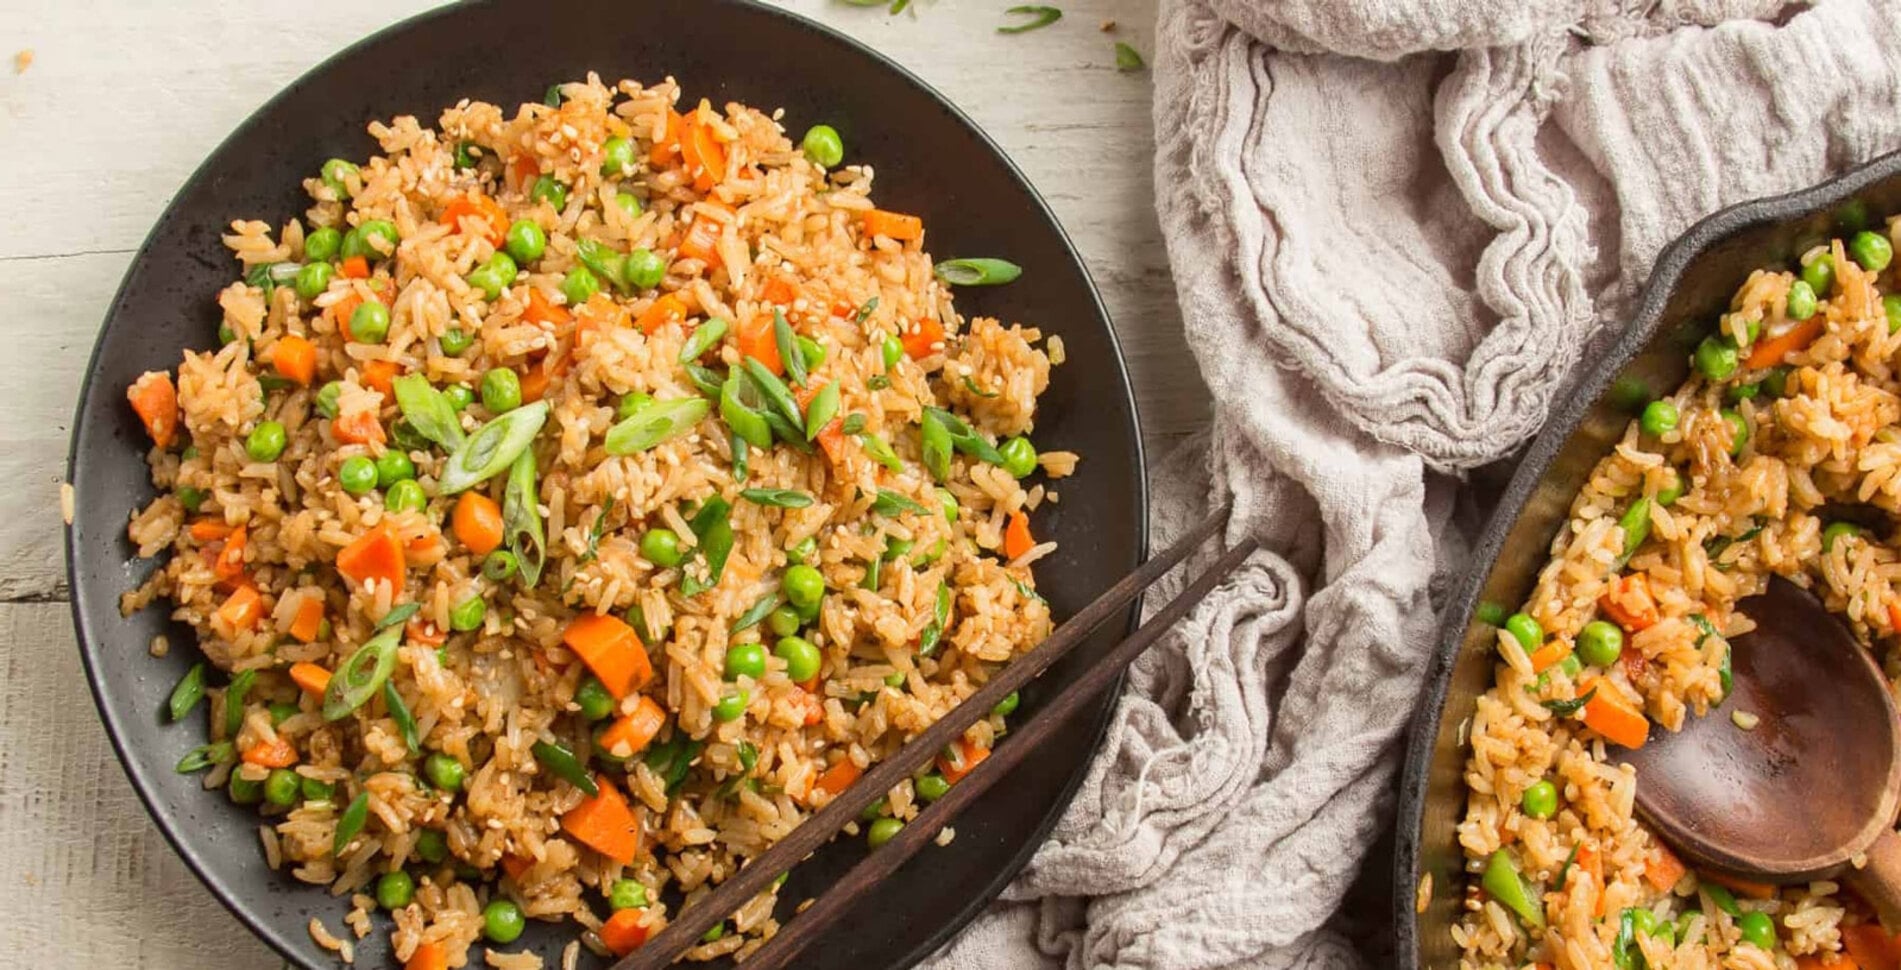 How to Make Tasty, Crispy Takeout-Style Vegan Fried Rice at Home